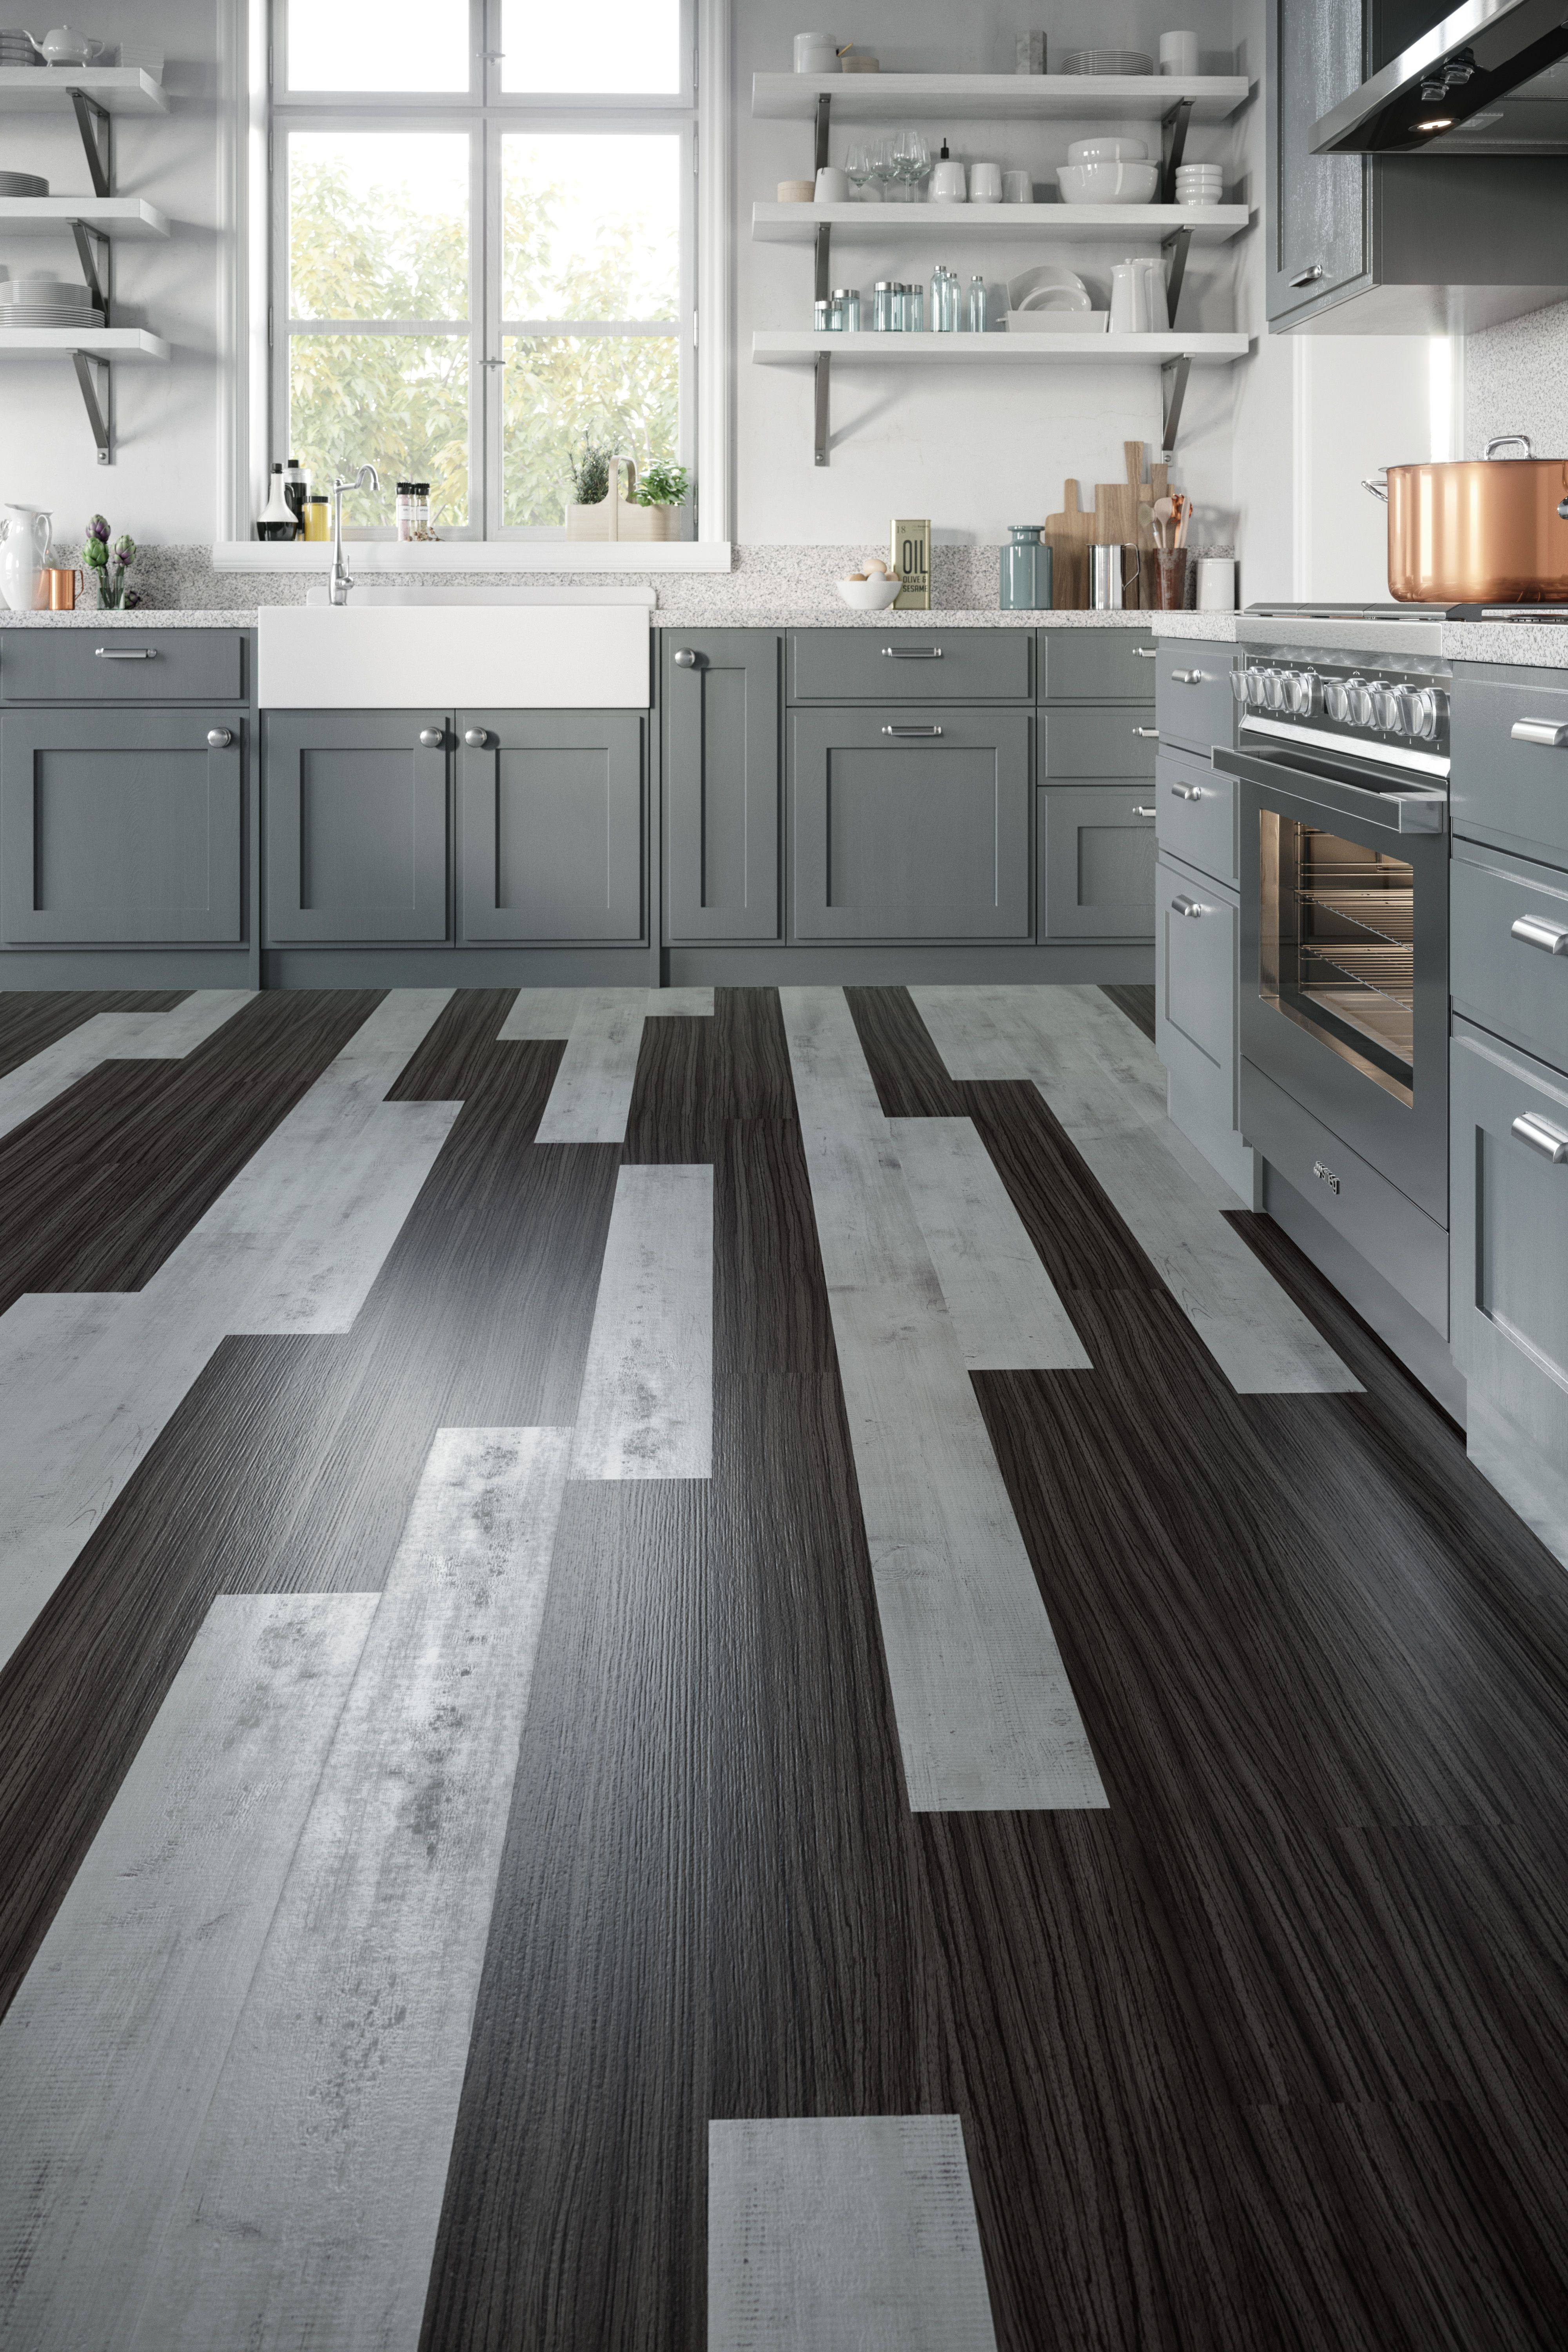 21 Stylish Pictures Of Hardwood and Tile Floors together 2024 free download pictures of hardwood and tile floors together of best what is the best vinyl tile flooring tips best flooring ideas within floor removing laminate gray wood vinyl flooring lovely engaging di